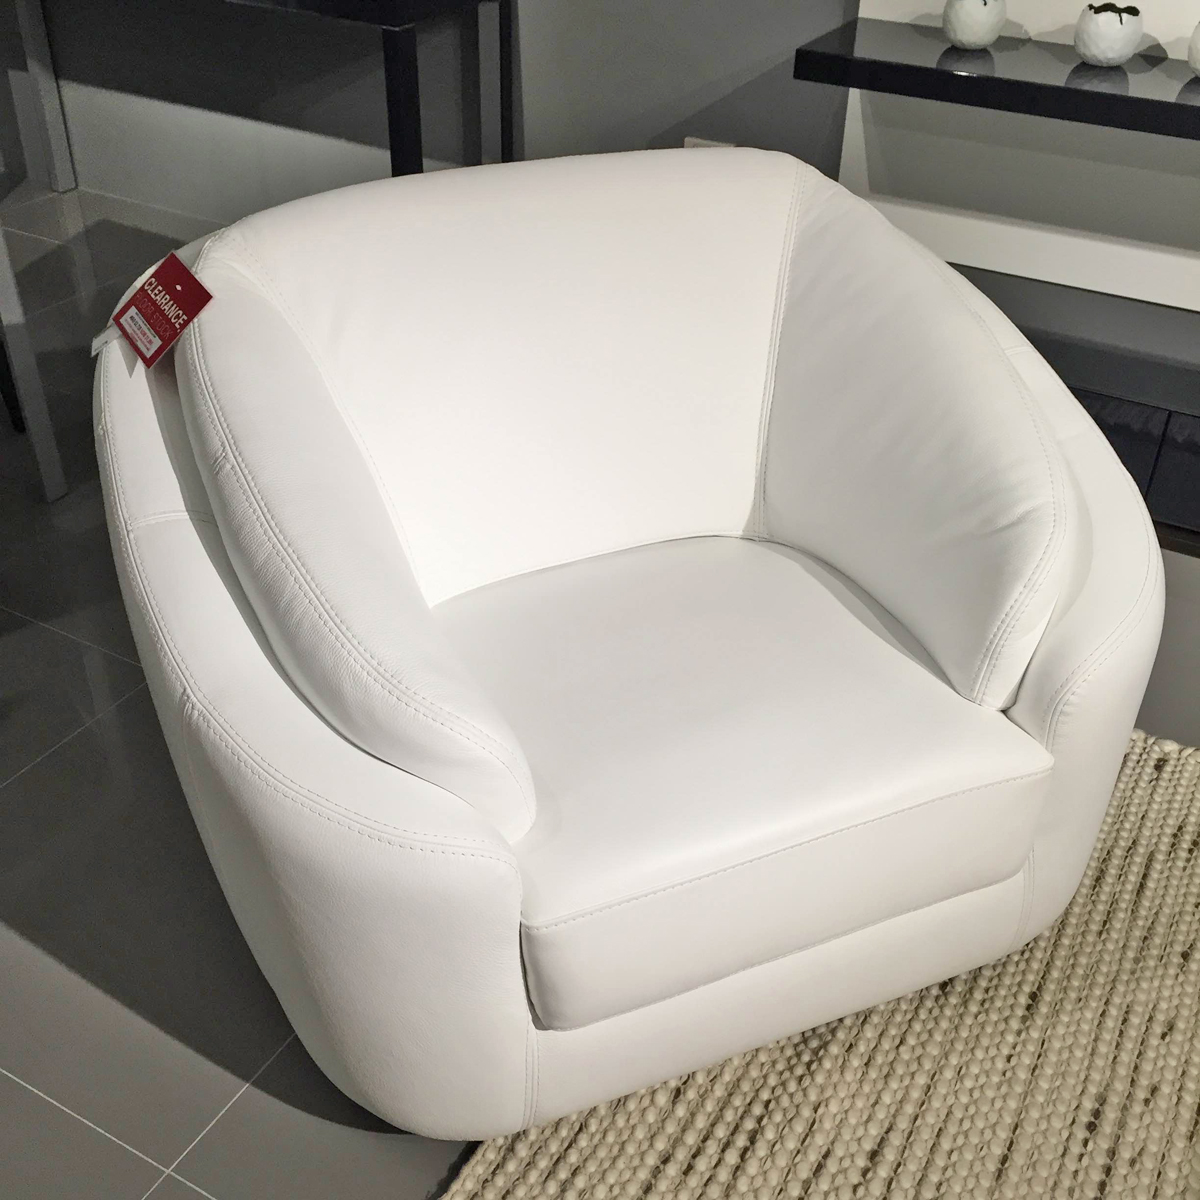 Crows Nest - Rusco Swivel Armchair White Leather - Beyond Furniture1200 x 1200